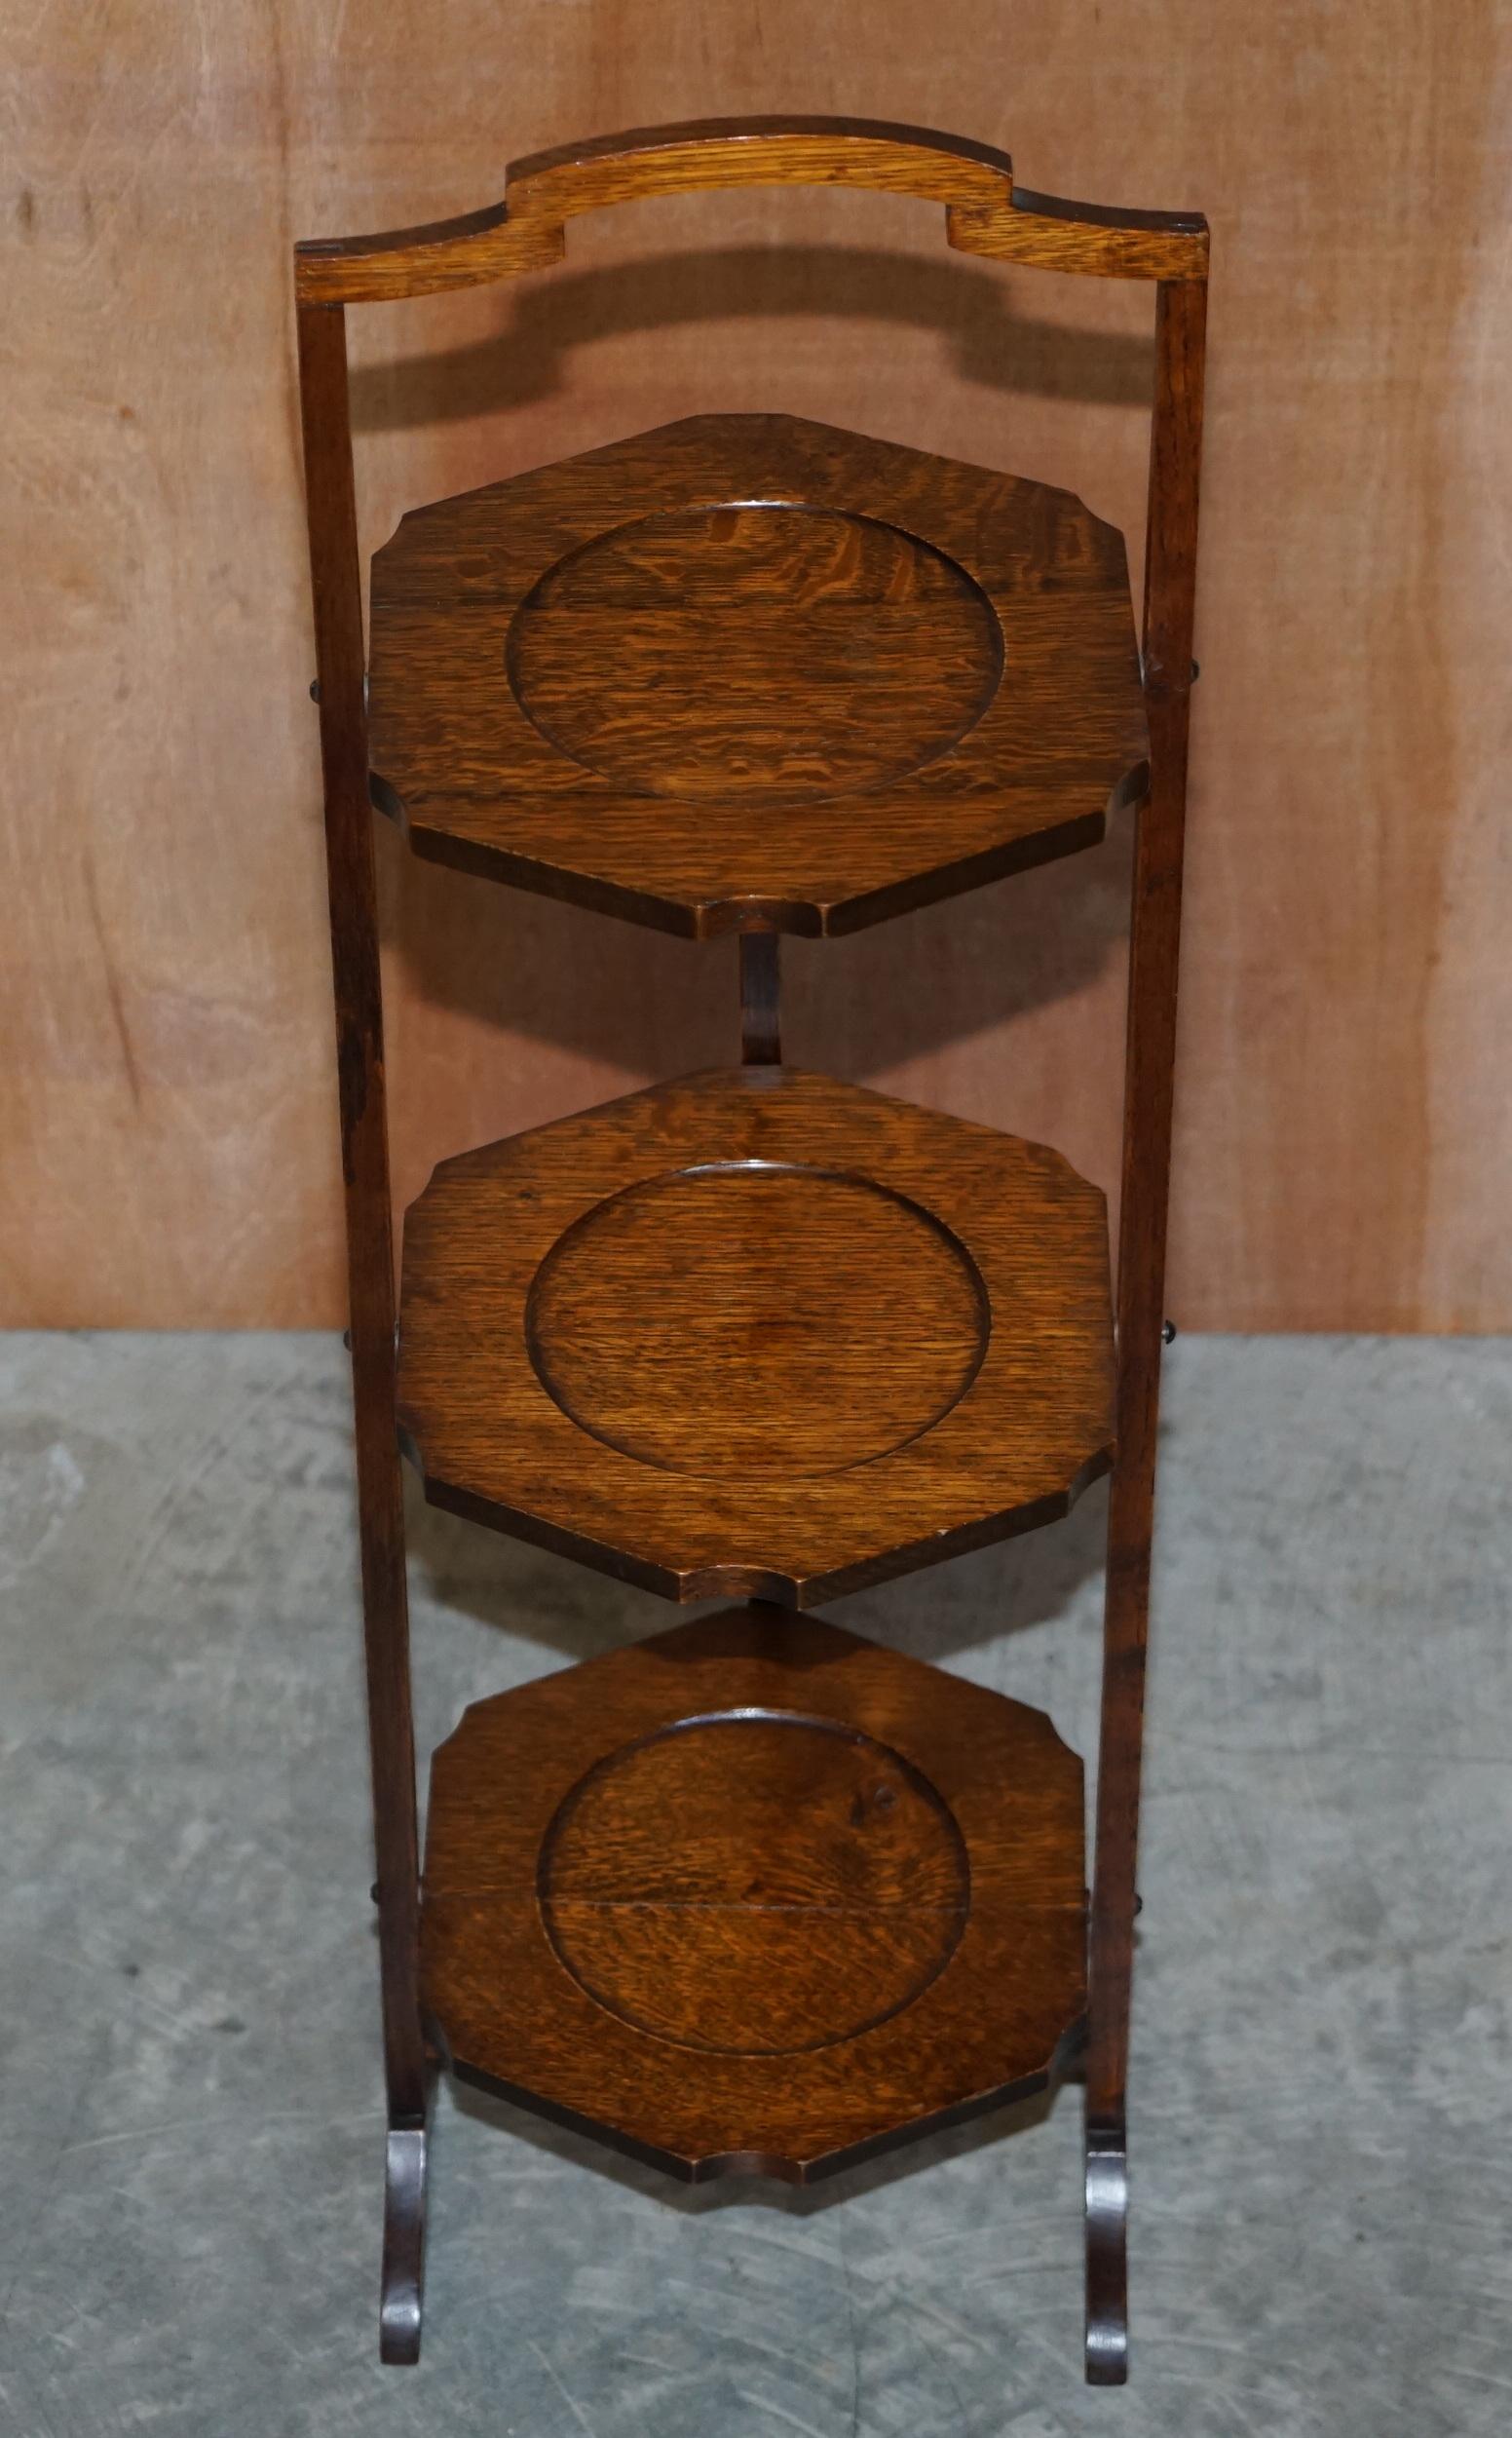 Hand-Crafted Edwardian English Oak Folding Whatnot Display Table or Cake Stand Lovely Patina